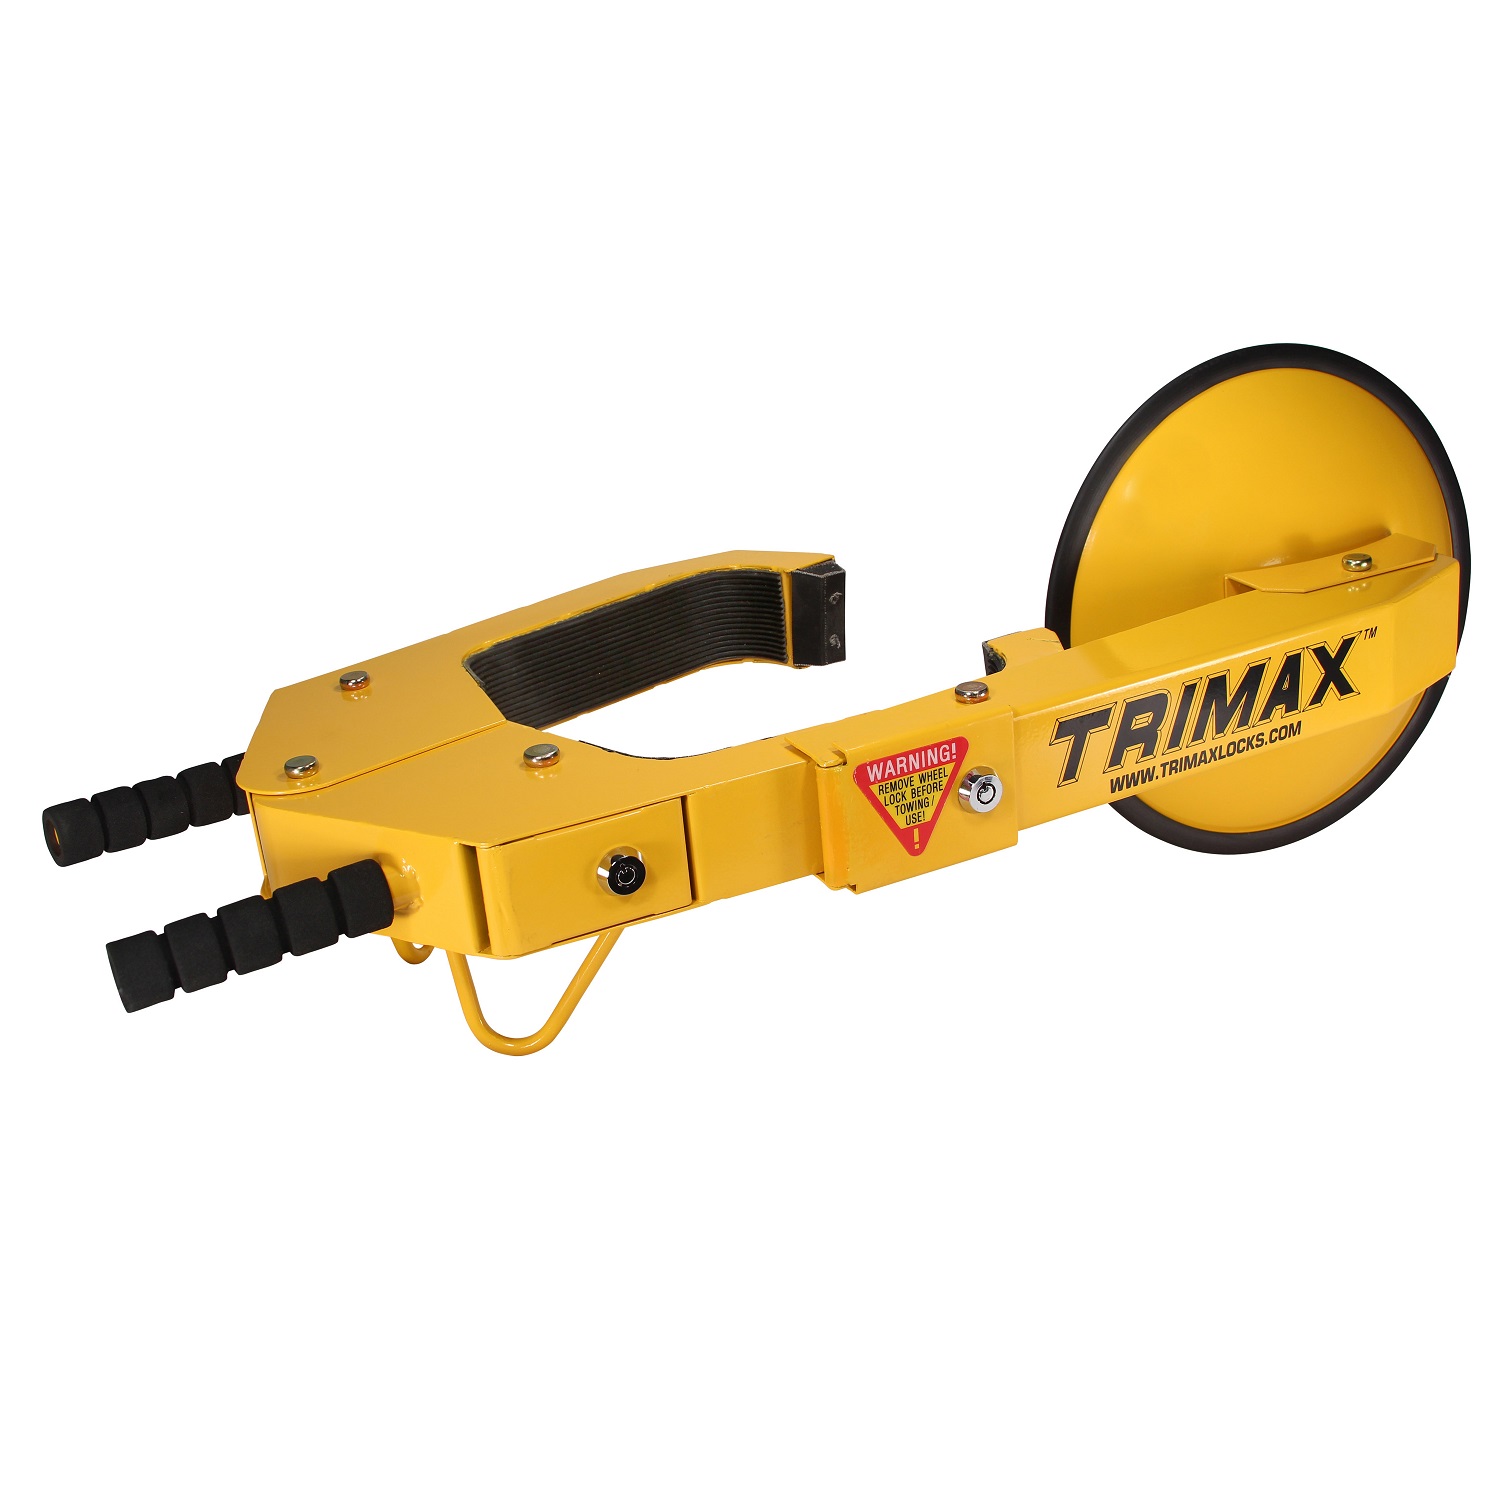 ULTRAMAX WHEEL LOCK W/DISC TO COVER LUGS PREVENTING TIRE REMOVAL AND THEFT